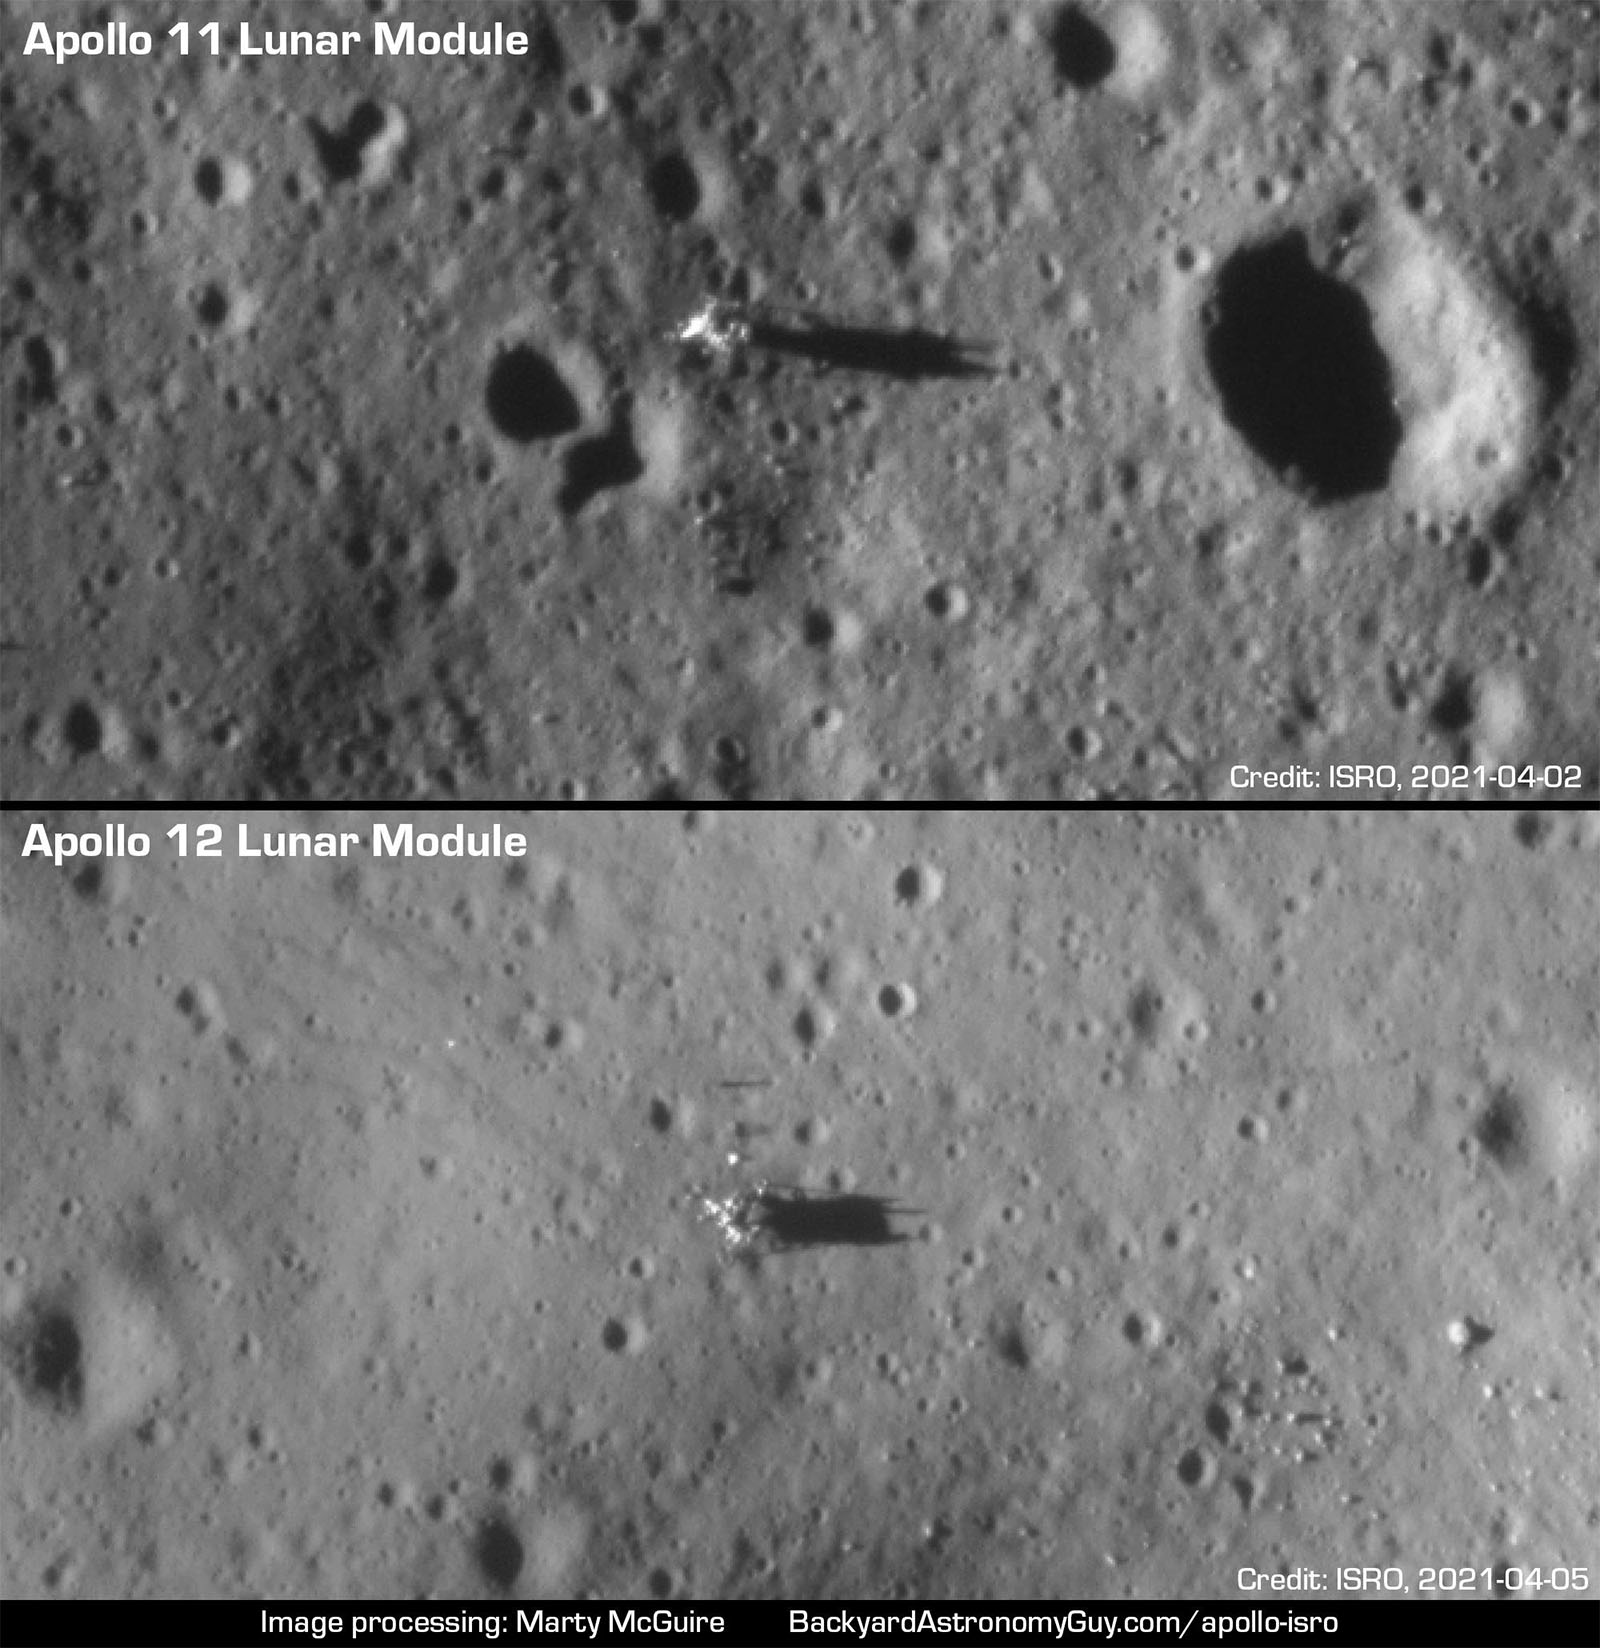 Top: high-resolution photo of the apollo 11 lunar module on the Moon 's surface with distinct contrasts. bottom: detailed image of the apollo 12 lunar module surrounded by lunar soil and small craters.